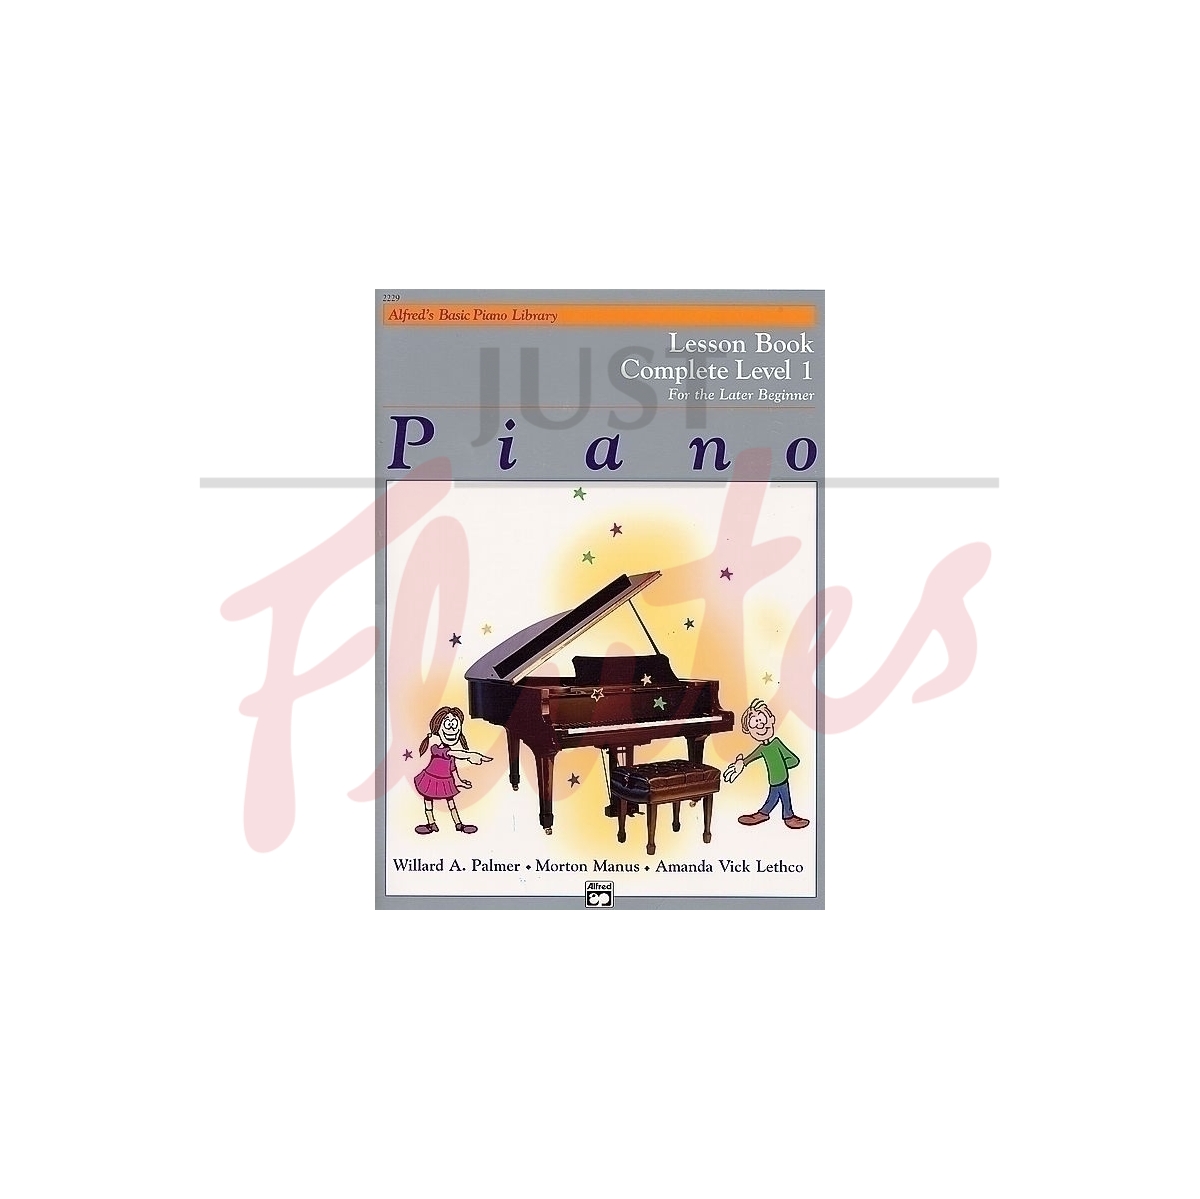 Alfred's Basic Piano Library: Lesson Book Complete Level 1